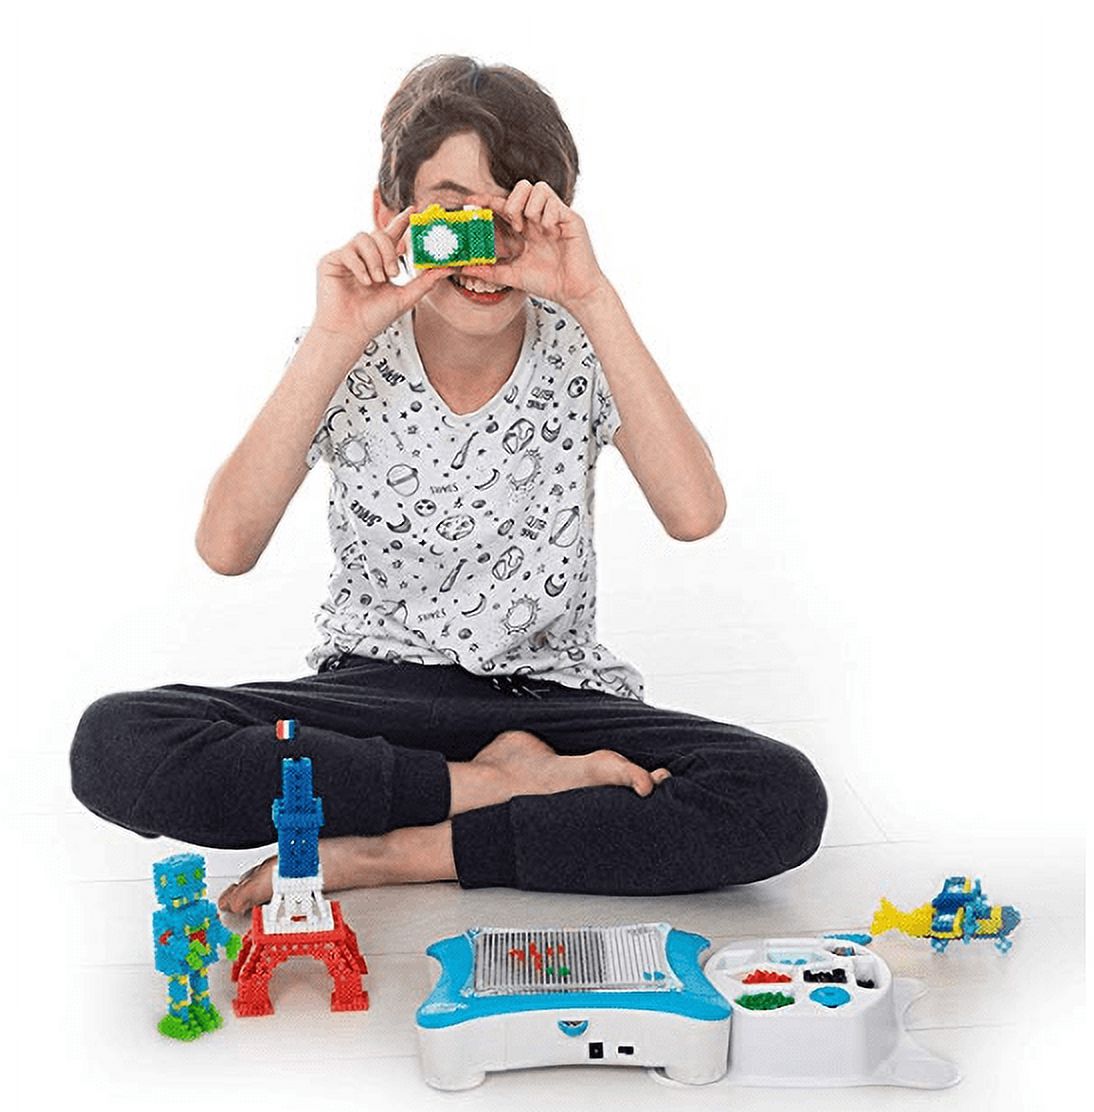 smART Pixelator: Create Your Own 3D Pixelated Art Projects, Gift for Kids,  Ages 7+